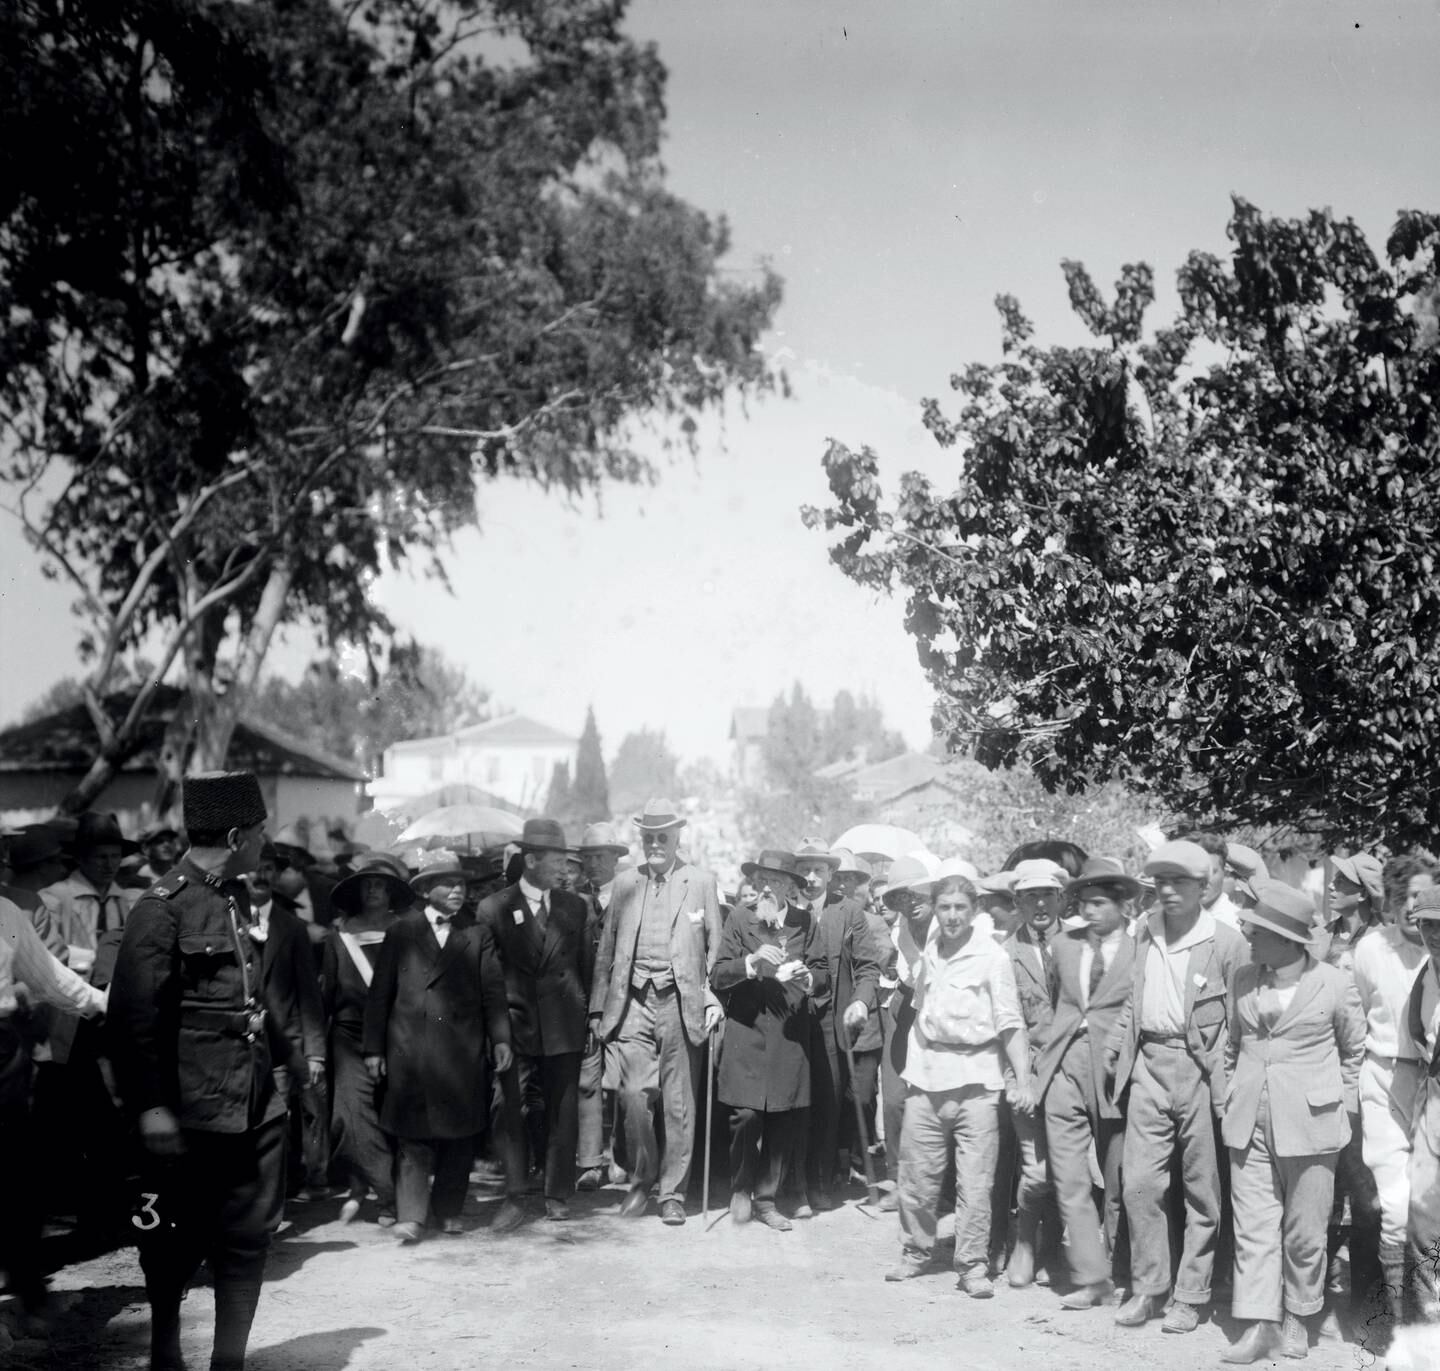 UNSPECIFIED - CIRCA 1754: Balfour visiting Jewish colonies, Palestine, 1925. Arthur James Balfour(1848-1930) British Conservative politician and statesman. UK Prime Minister 1902-1905. As Foreign Secretary was responsible for the Balfour Declaration, 1917. (Photo by Universal History Archive/Getty Images)